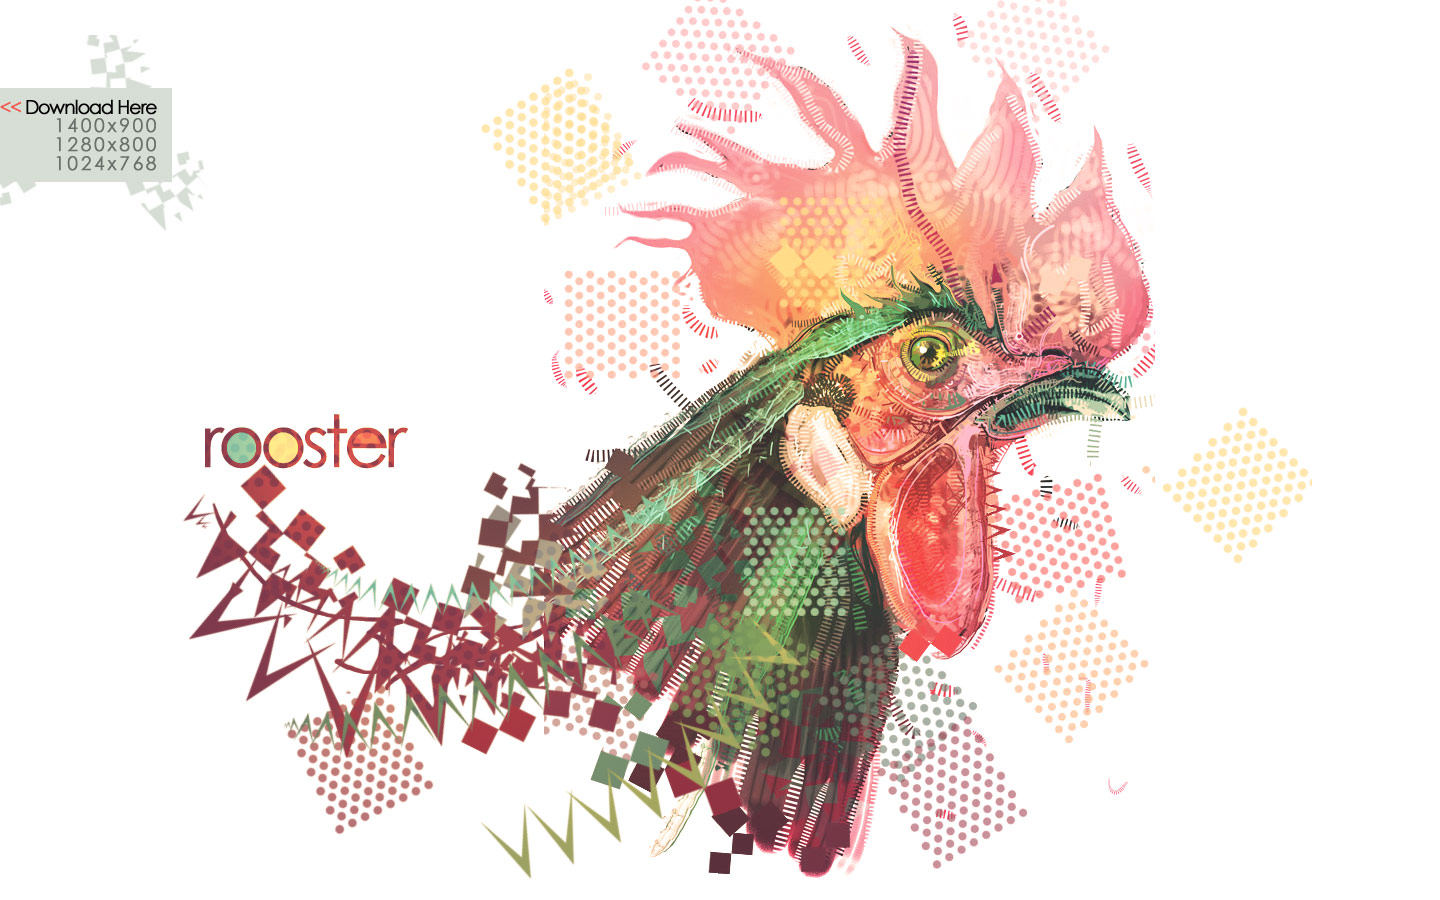 Rooster Wallpaper By Metalsan